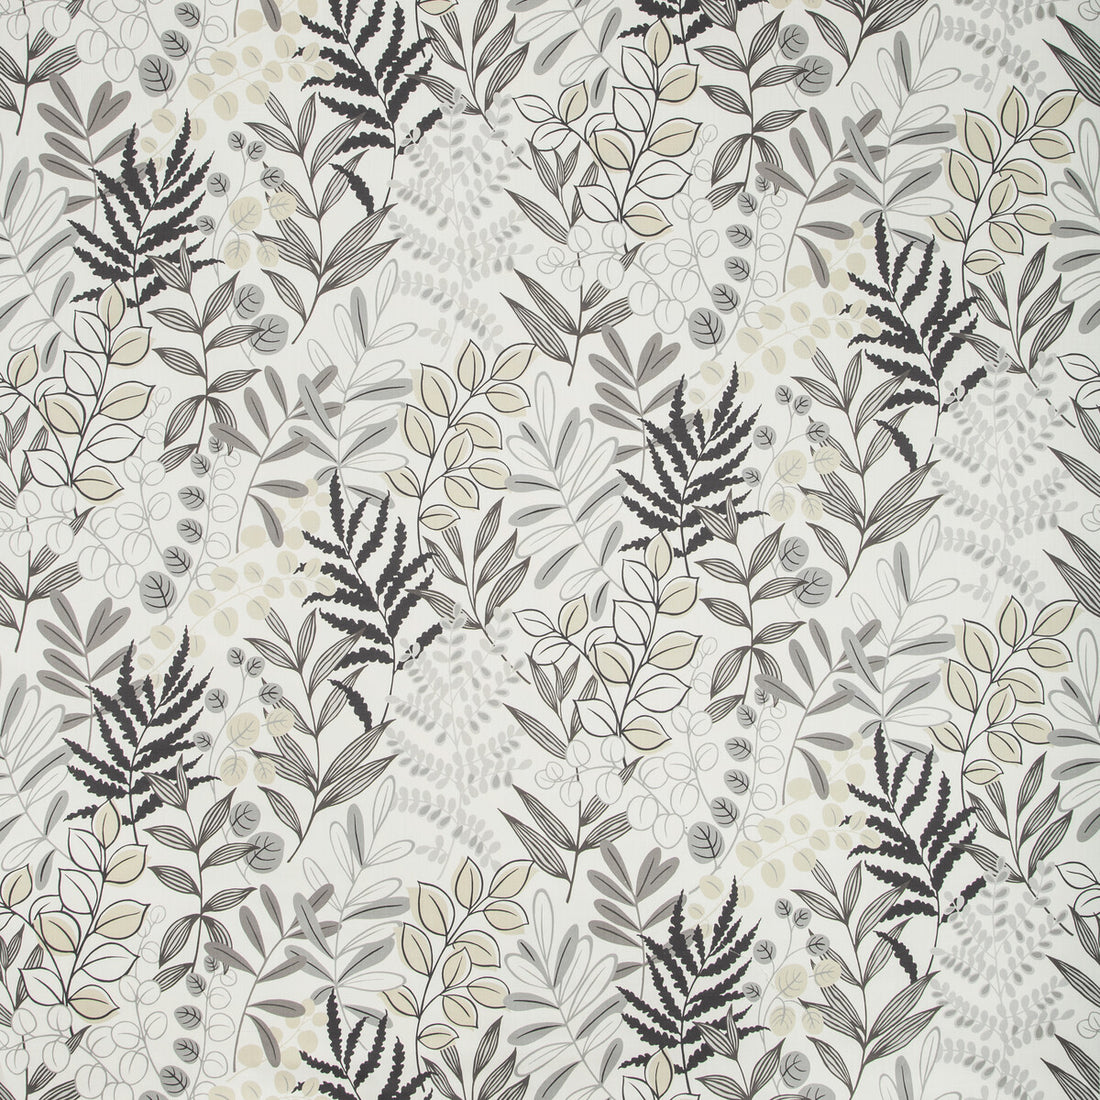 Ferngarden fabric in quarry color - pattern FERNGARDEN.21.0 - by Kravet Basics in the Bermuda collection